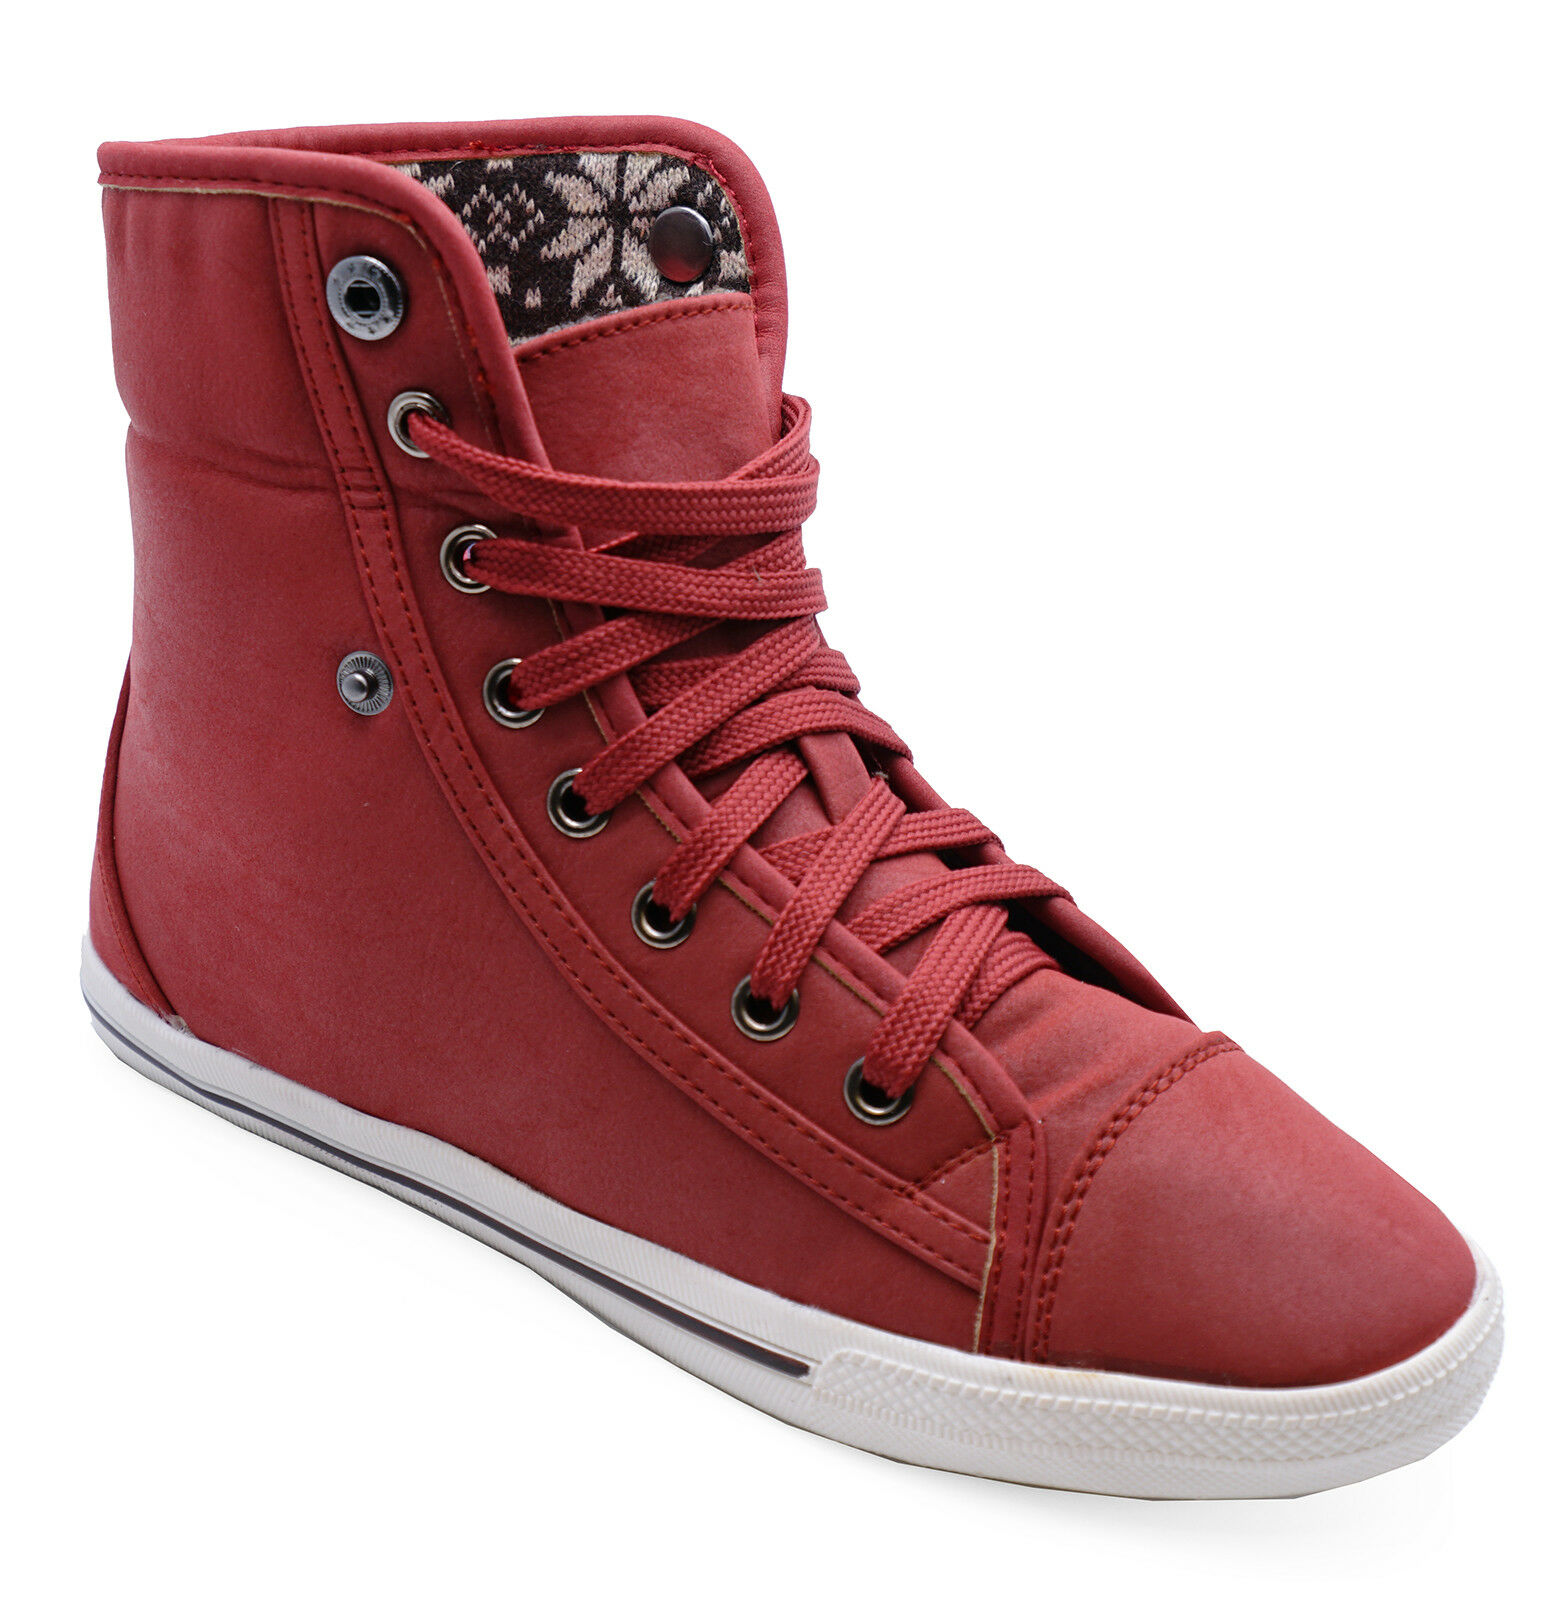 red trainer boots